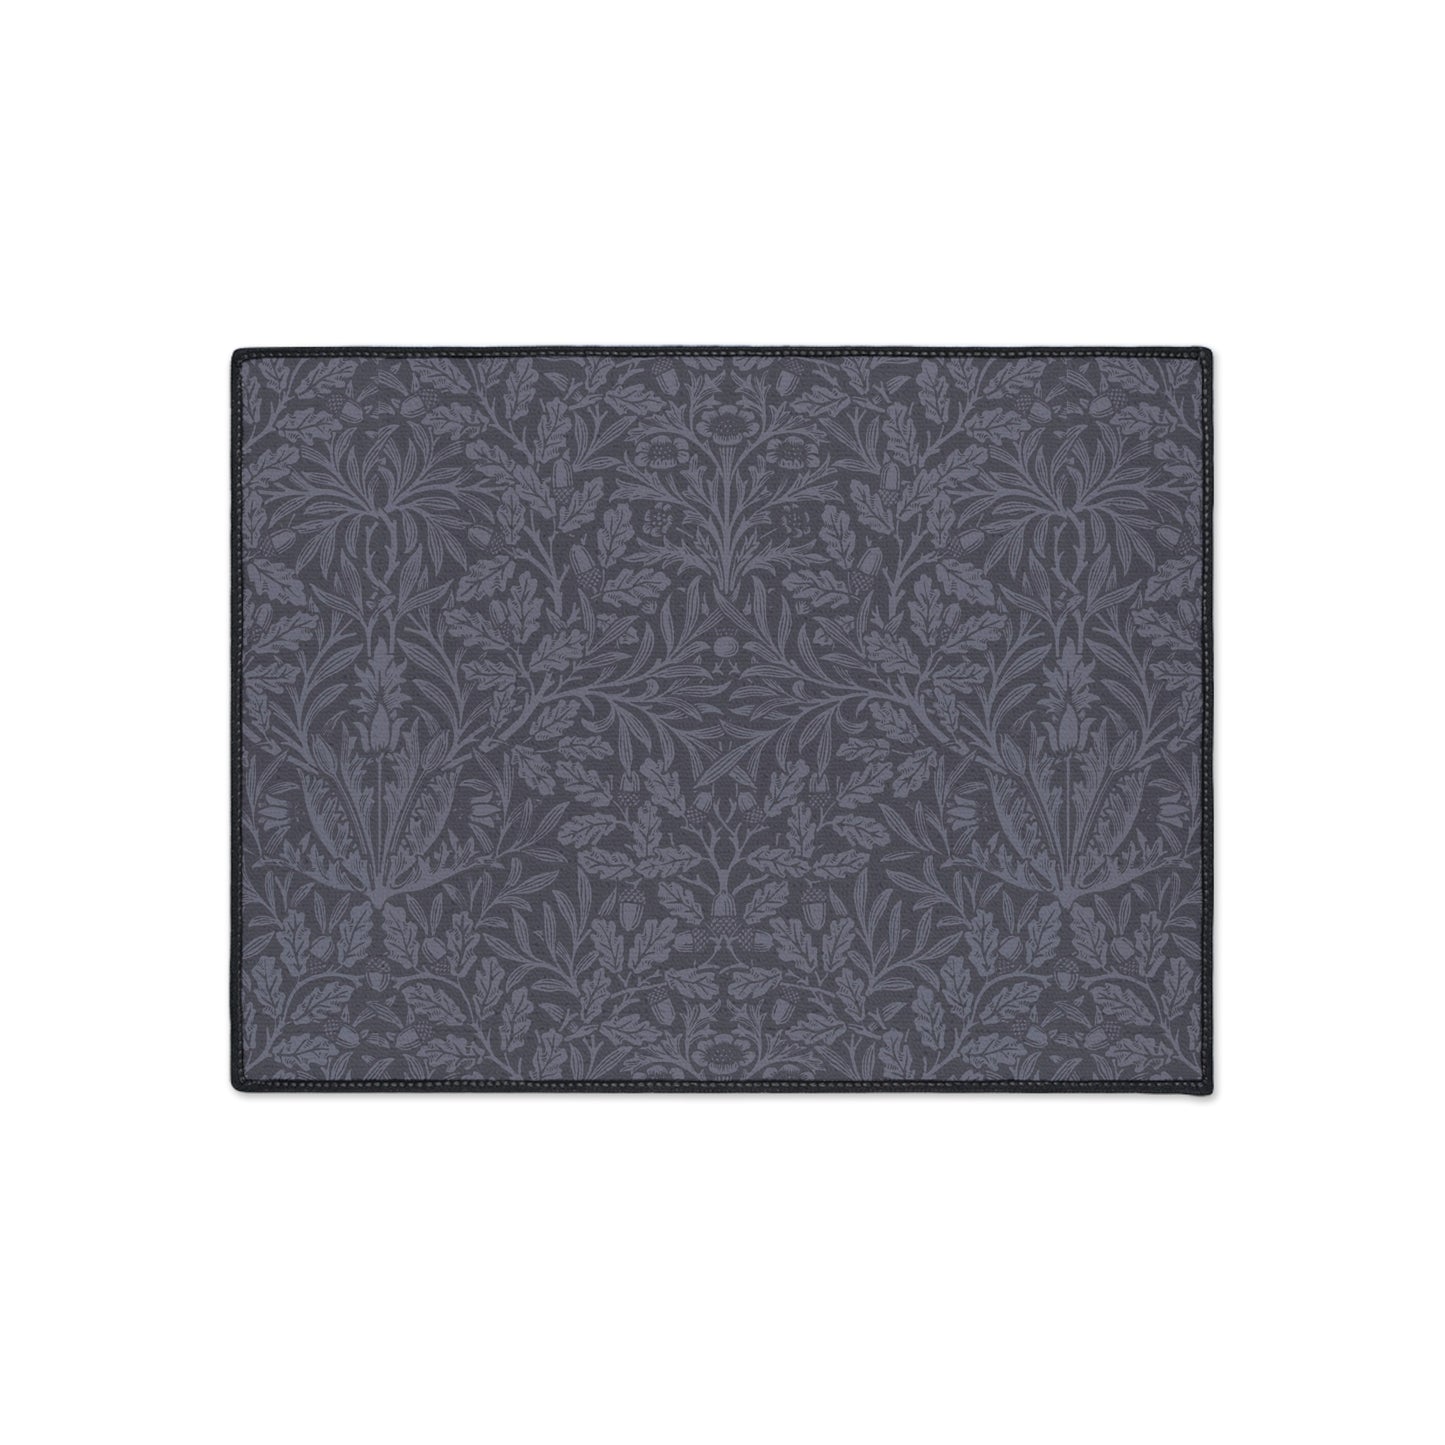 william-morris-co-heavy-duty-floor-mat-acorns-and-oak-leaves-collection-smoky-blue-5